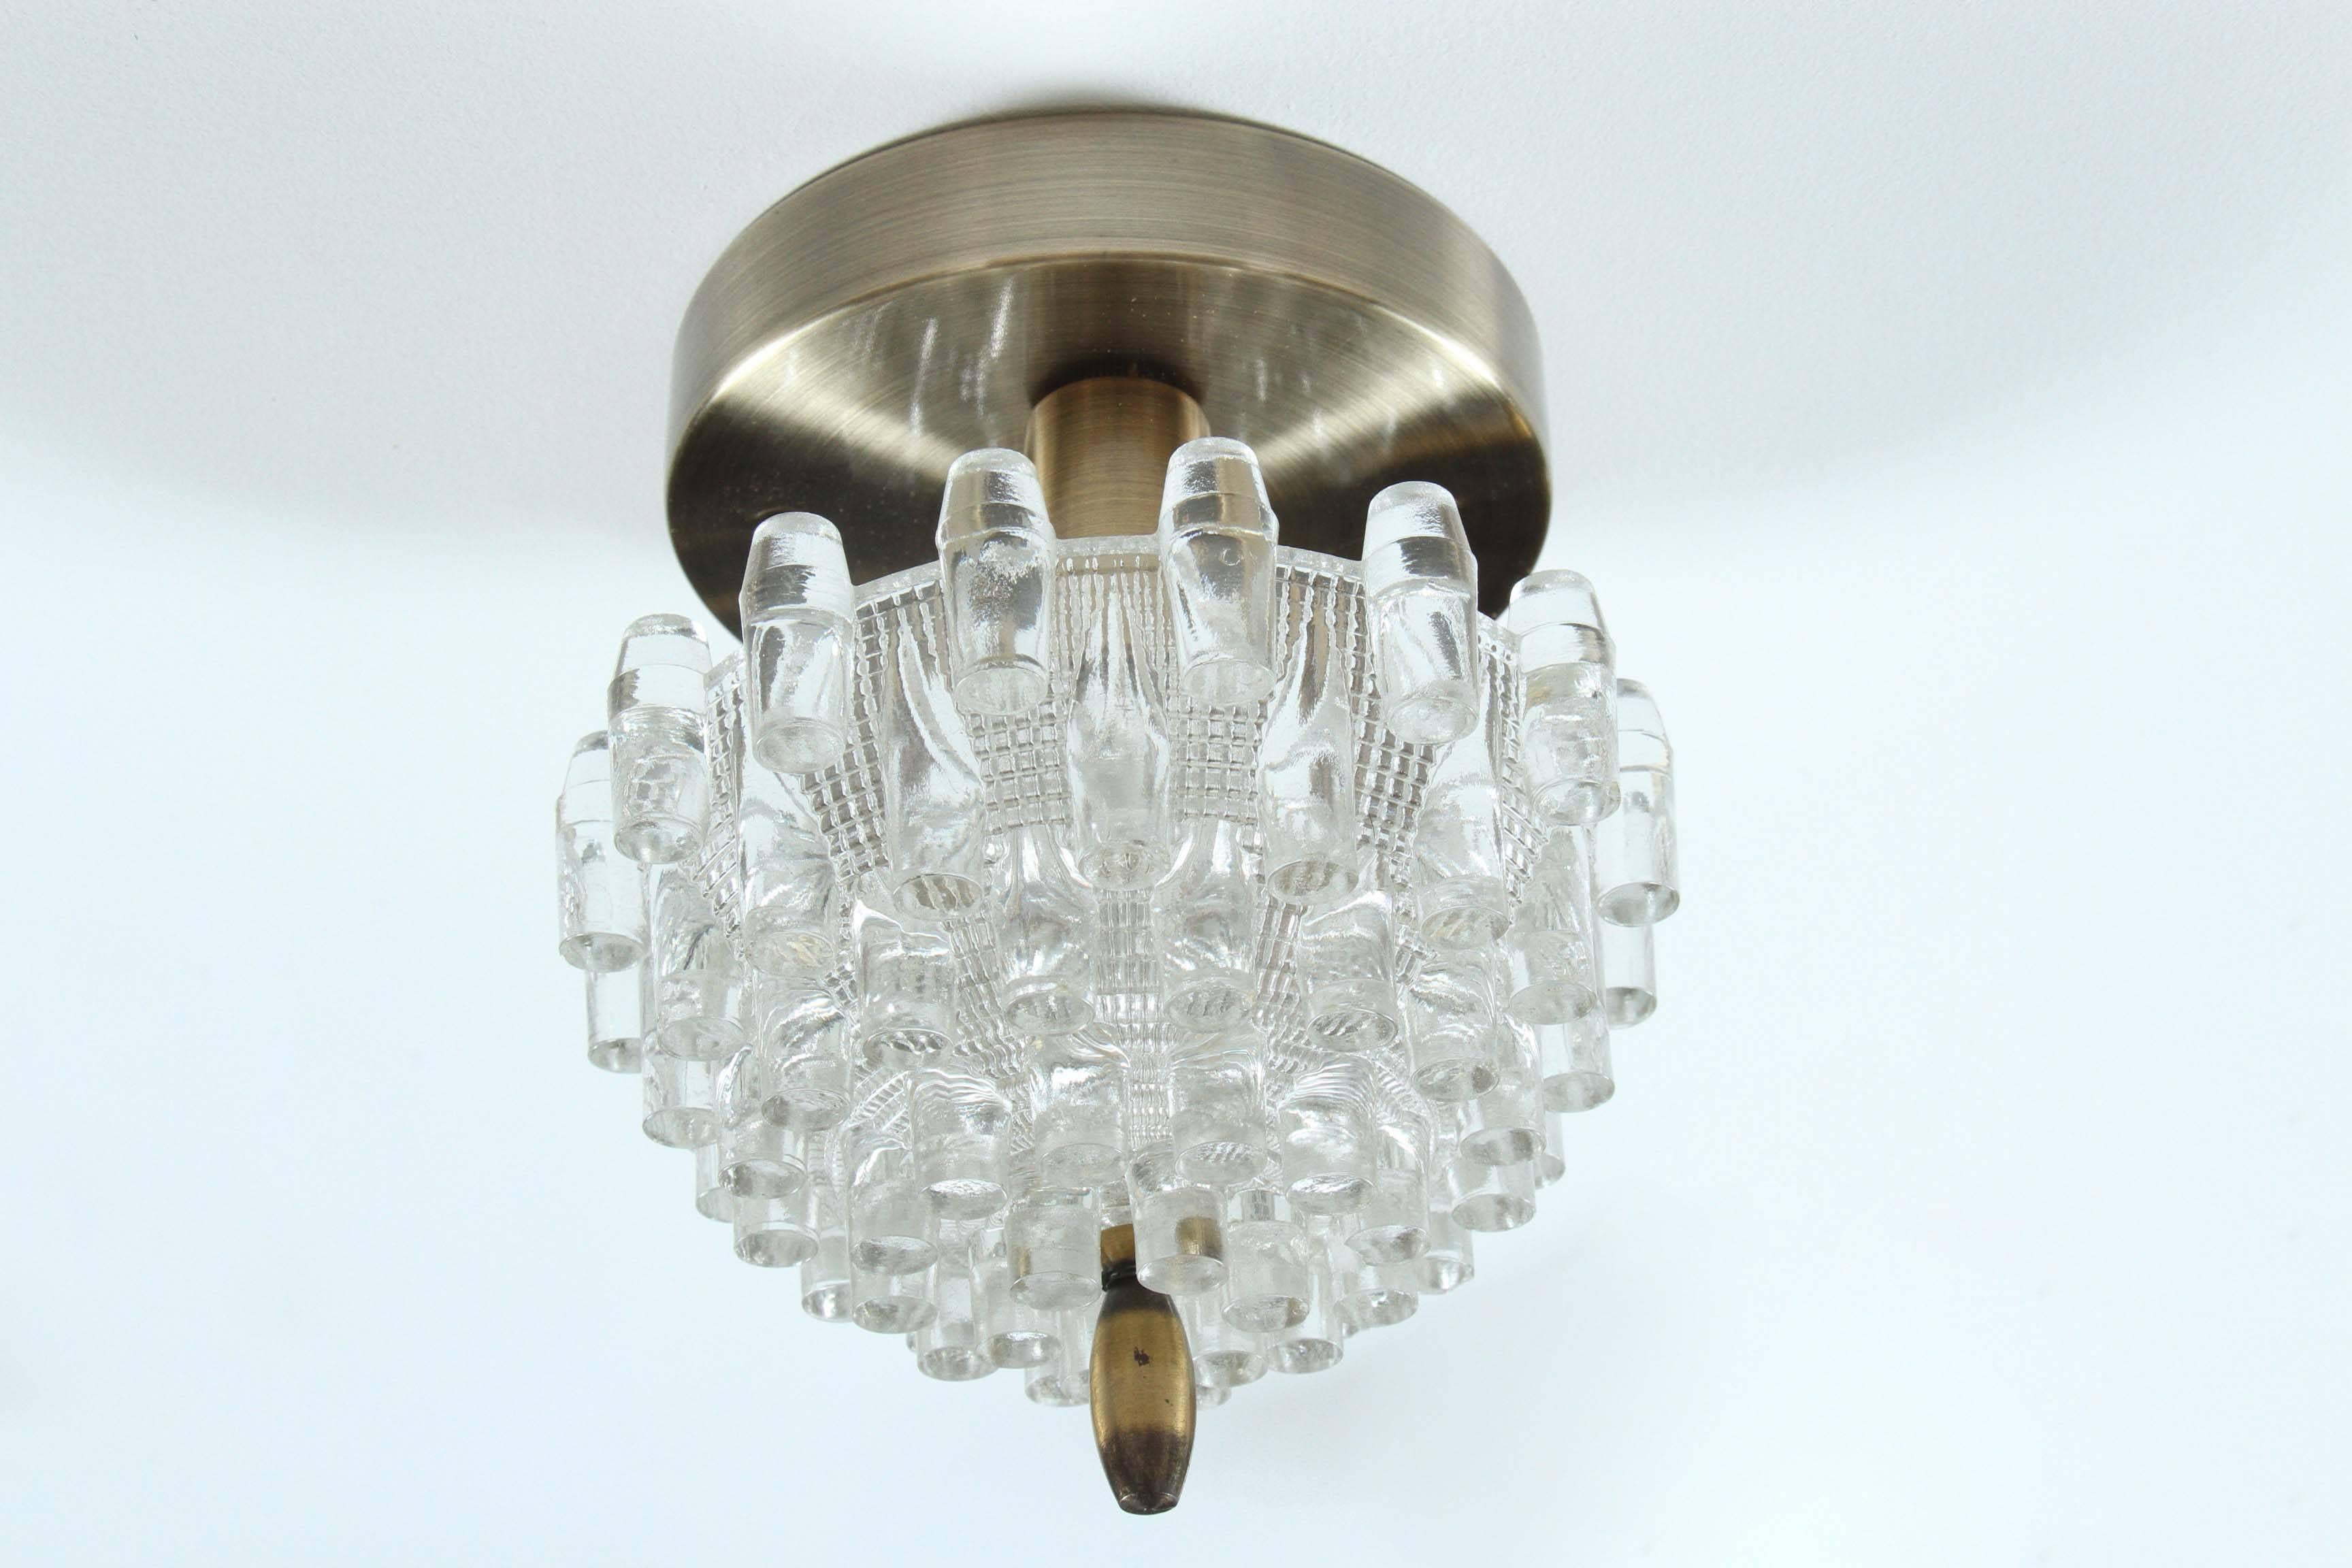 Pair of unusual moulded glass sconces. 
The dome shaped glass element is richly textured, with a deco effect and they are mounted on antique brass wall plates.